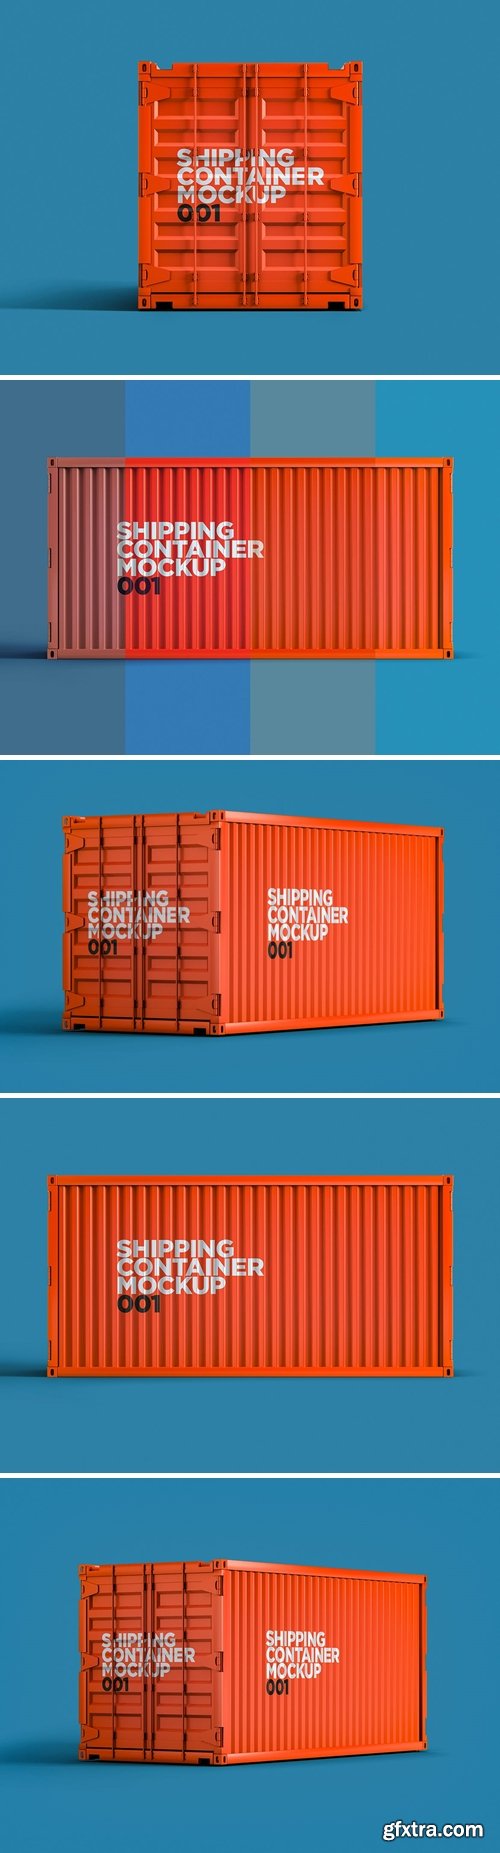 Shipping Container Mockup 001